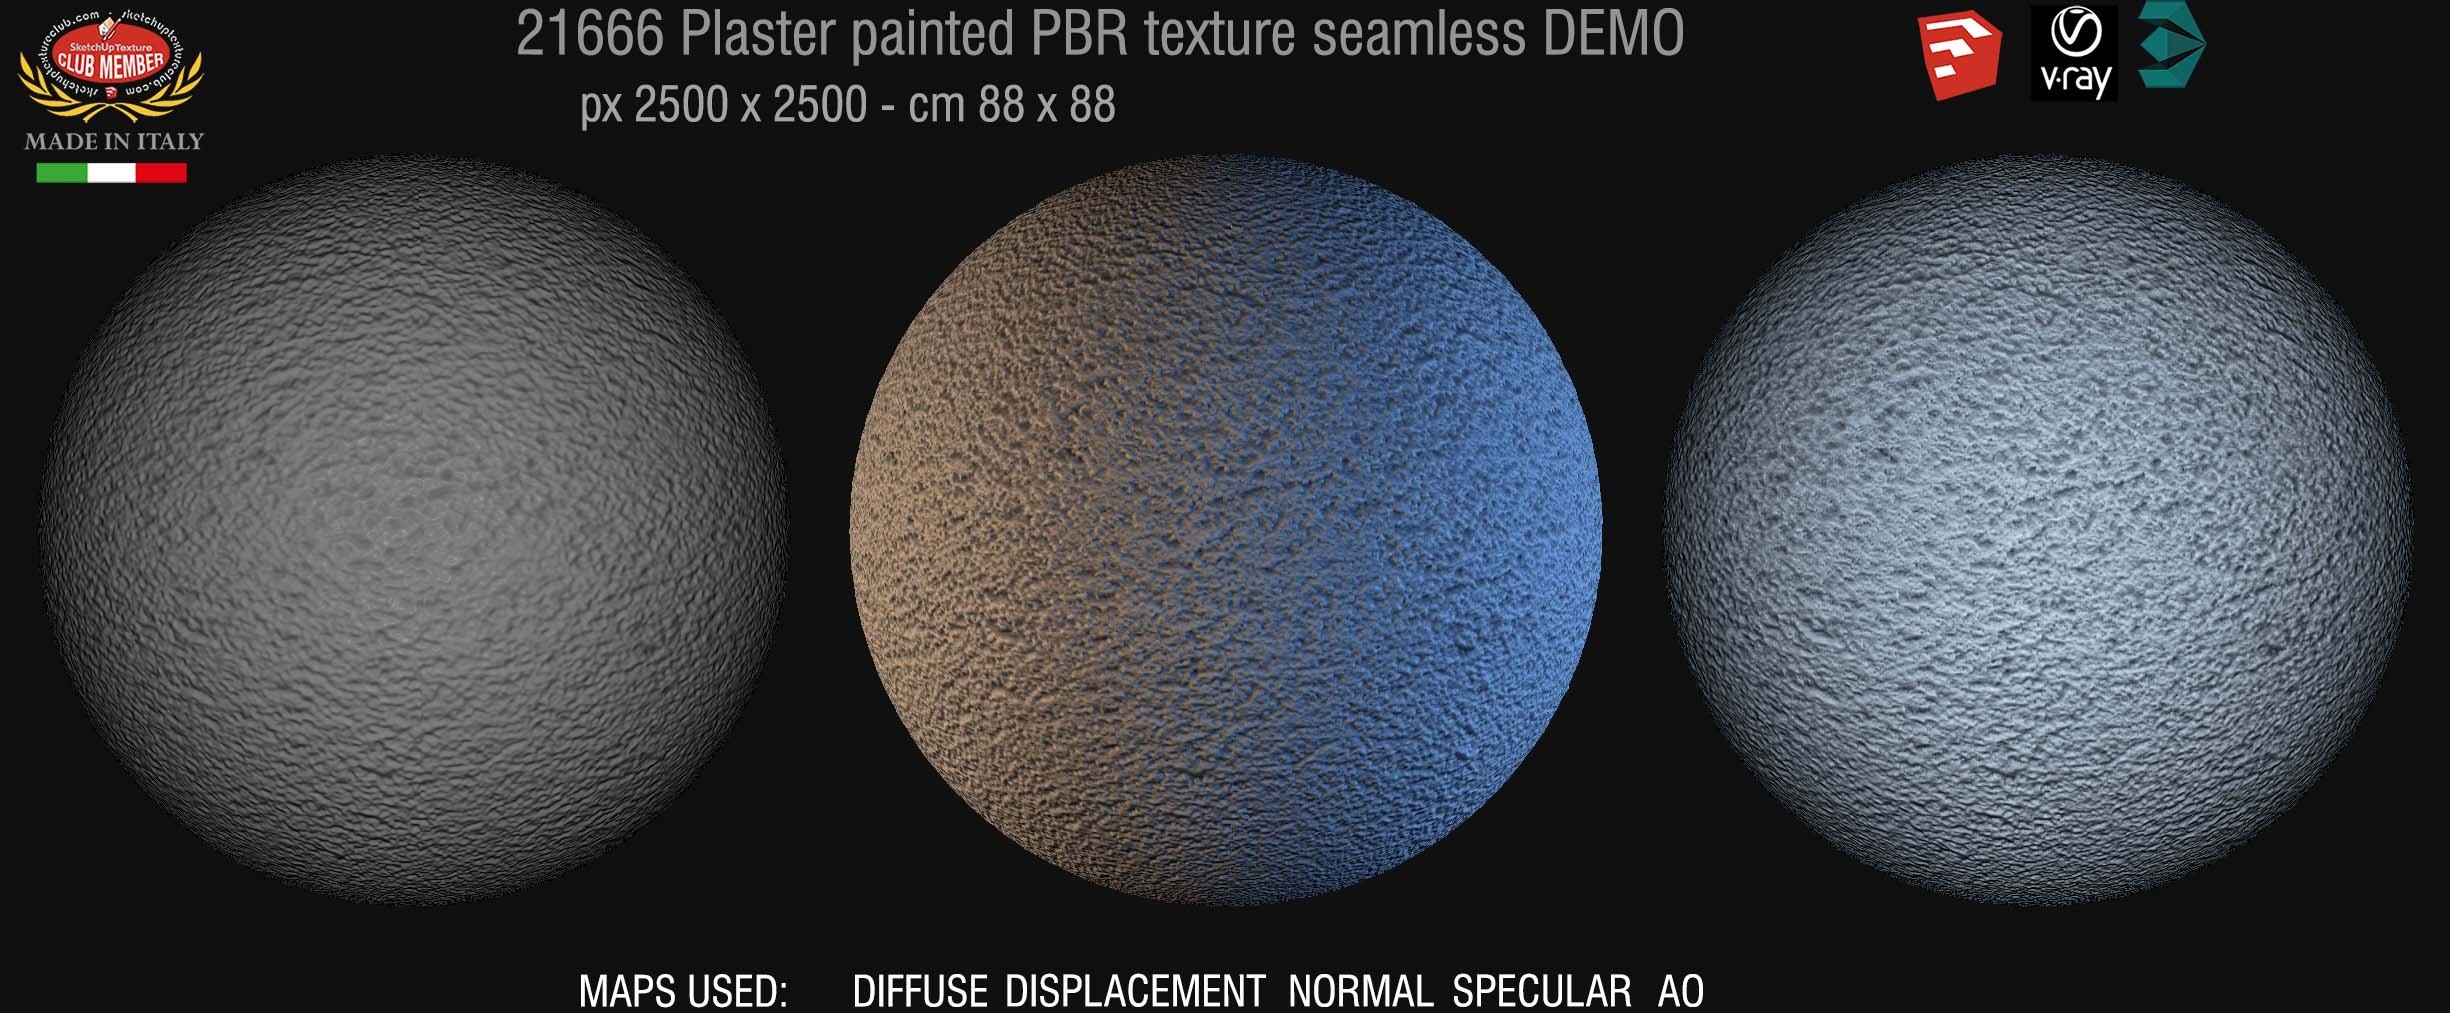 21666 plaster painted PBR texture seamless DEMO